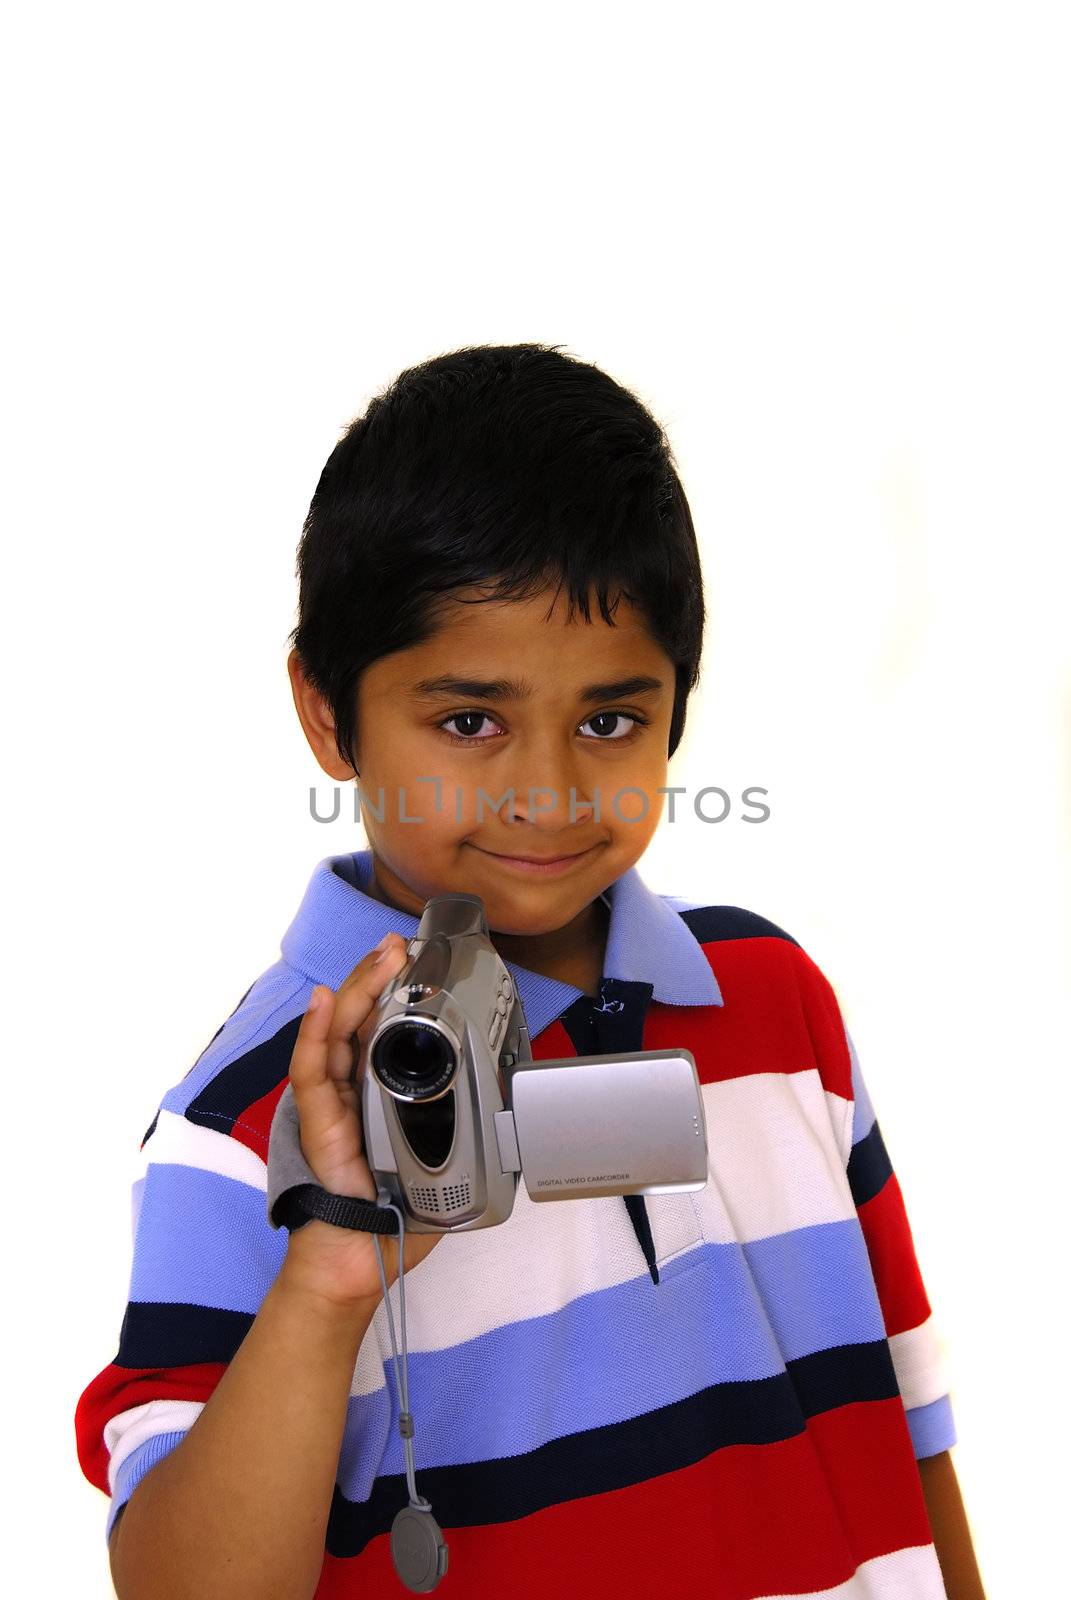 An handsome Indian kid holding a video camera